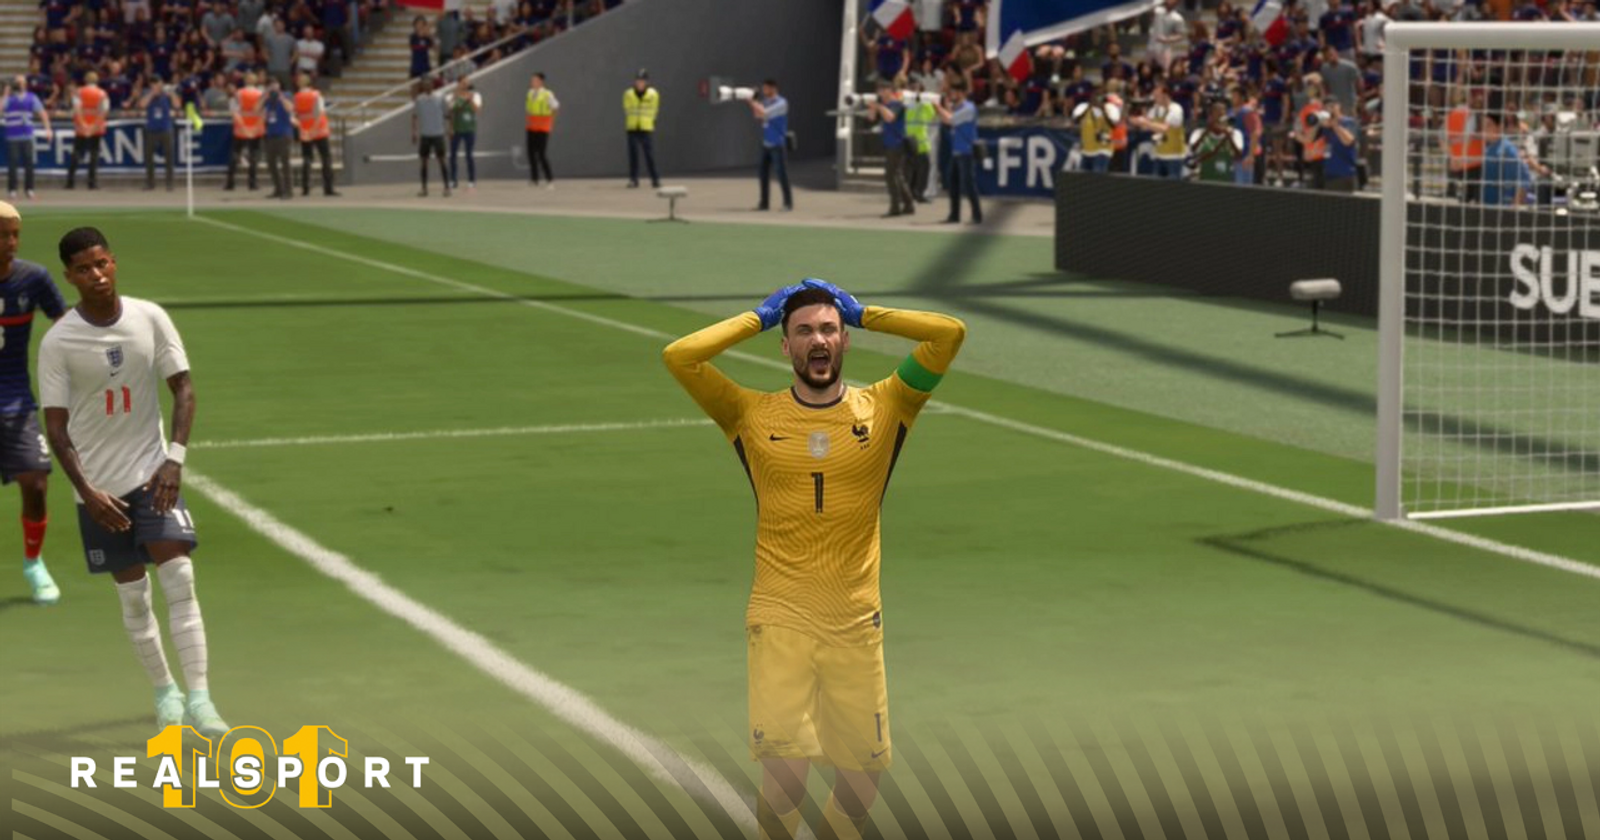 FIFA 23: Best and worst clubs and national teams to play with by